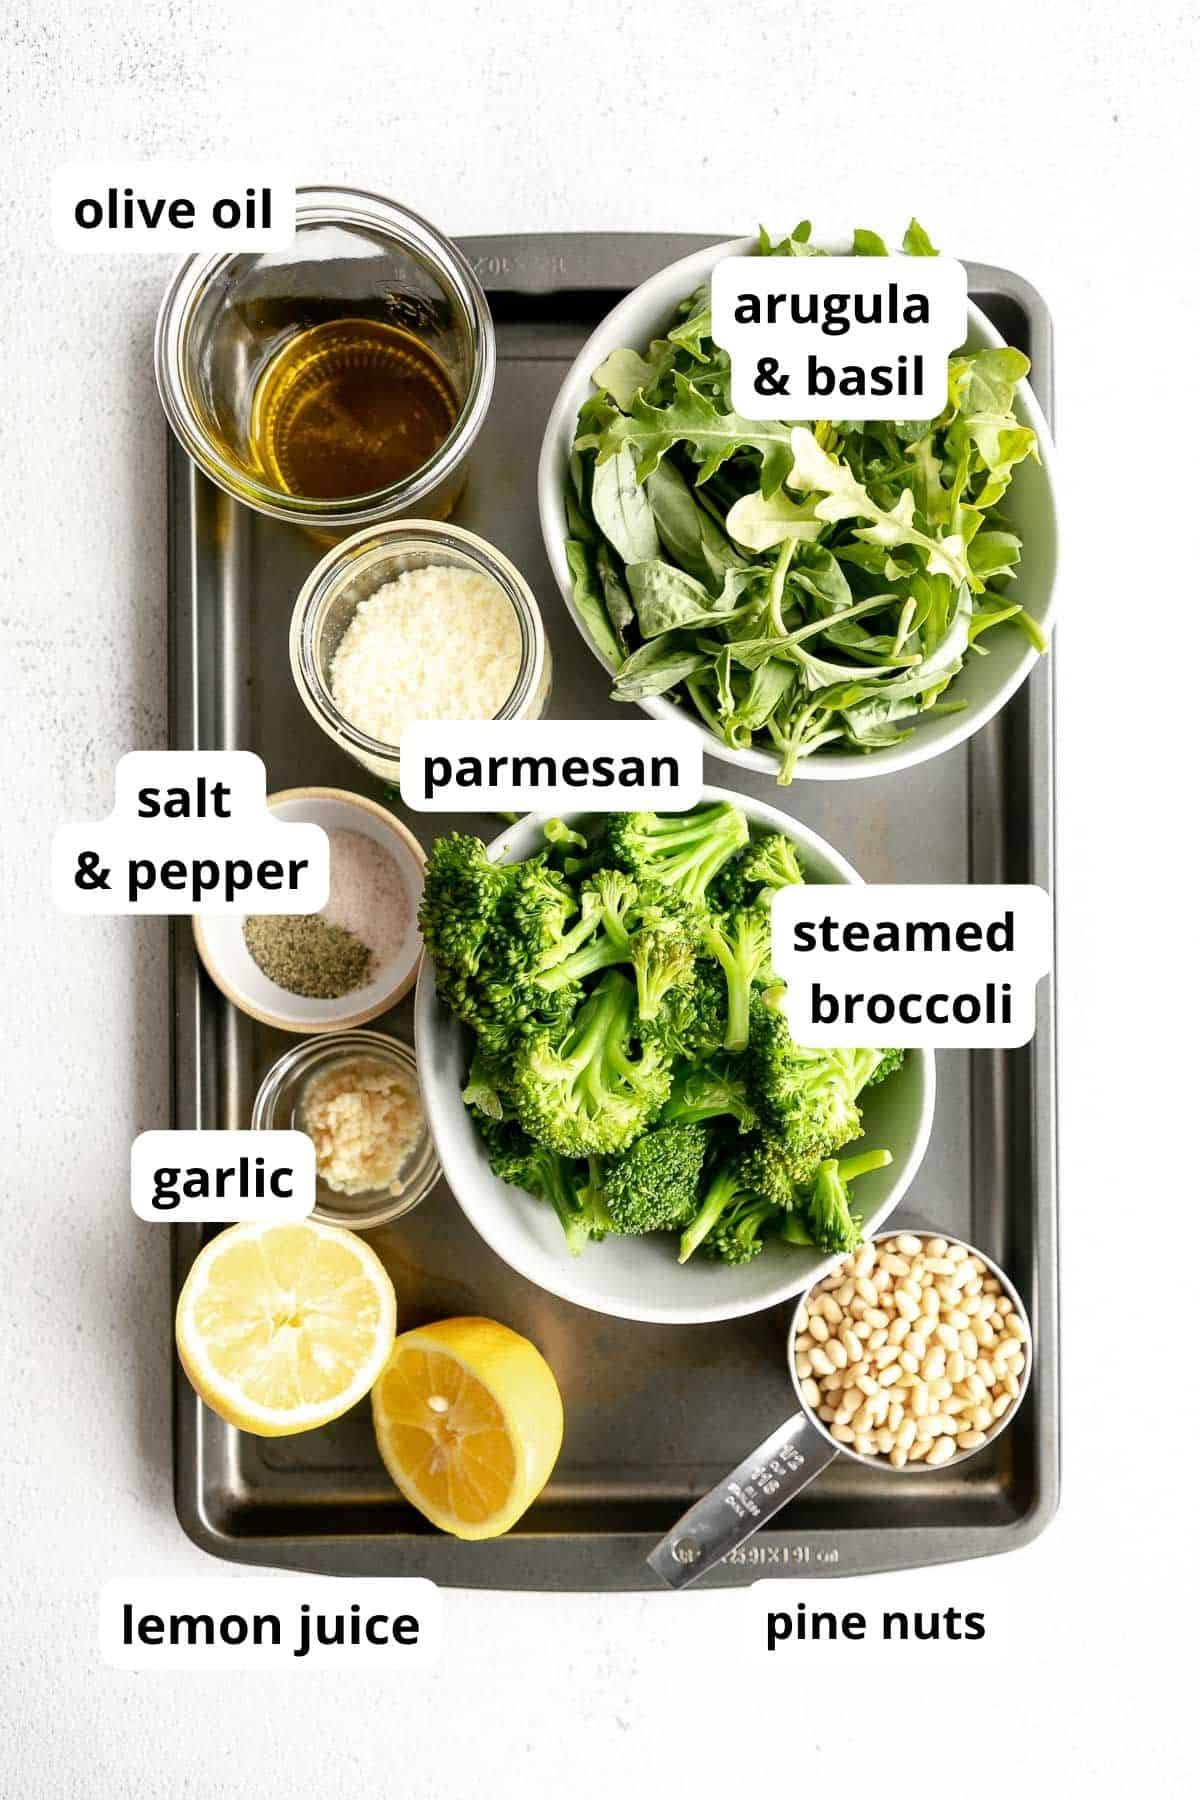 ingredients for the pesto in bowls with labels